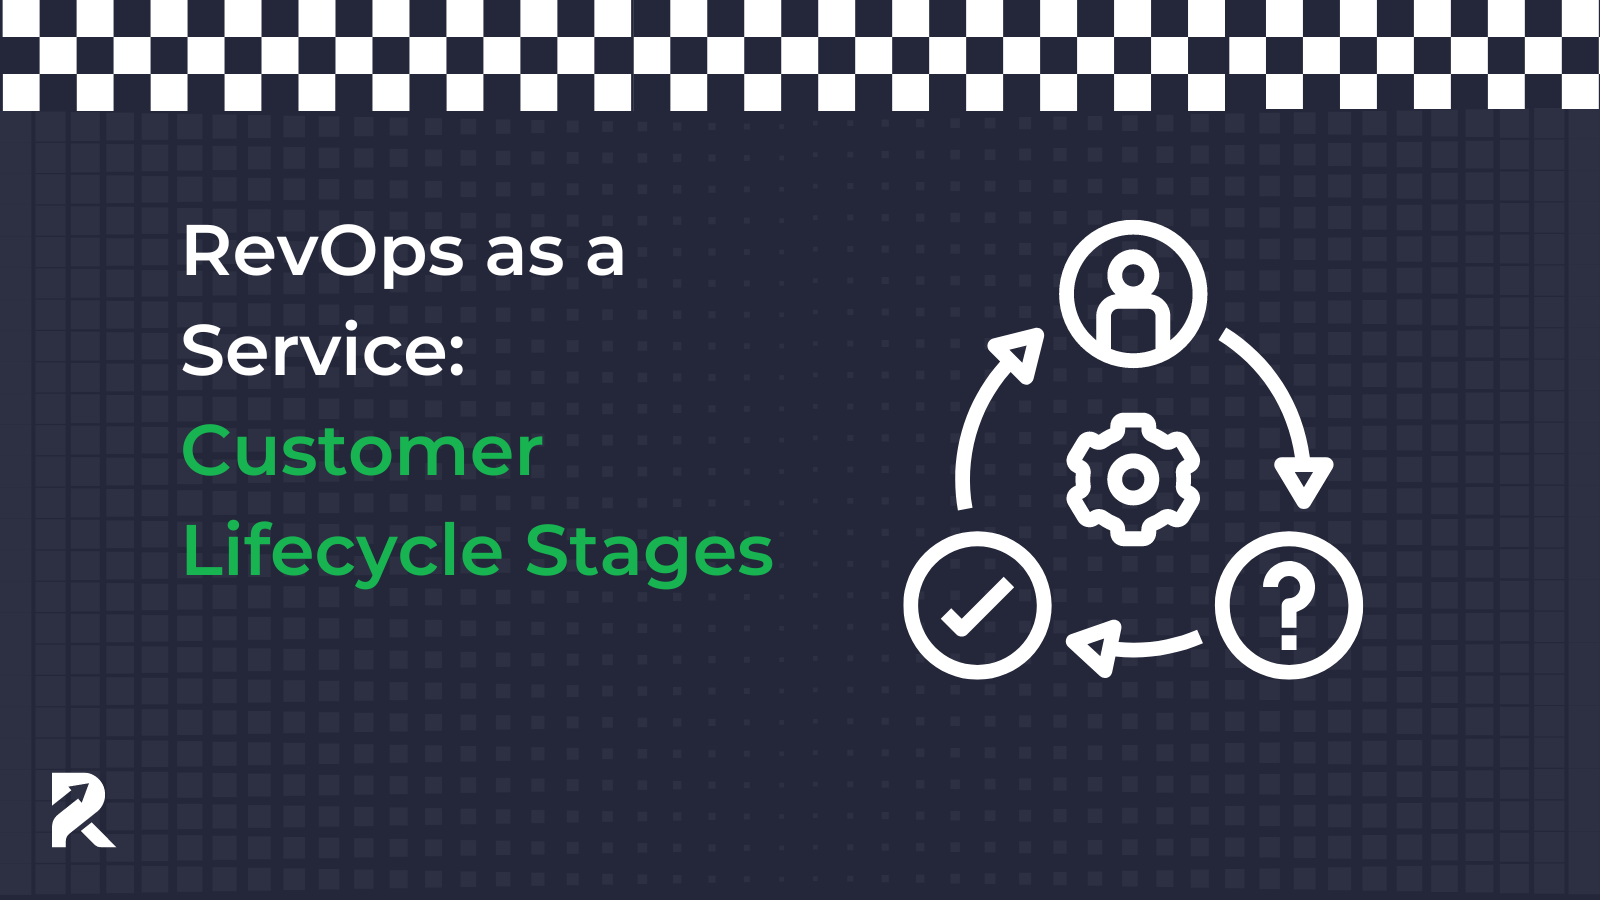 RevOps as a Service: Customer Lifecycle Stages